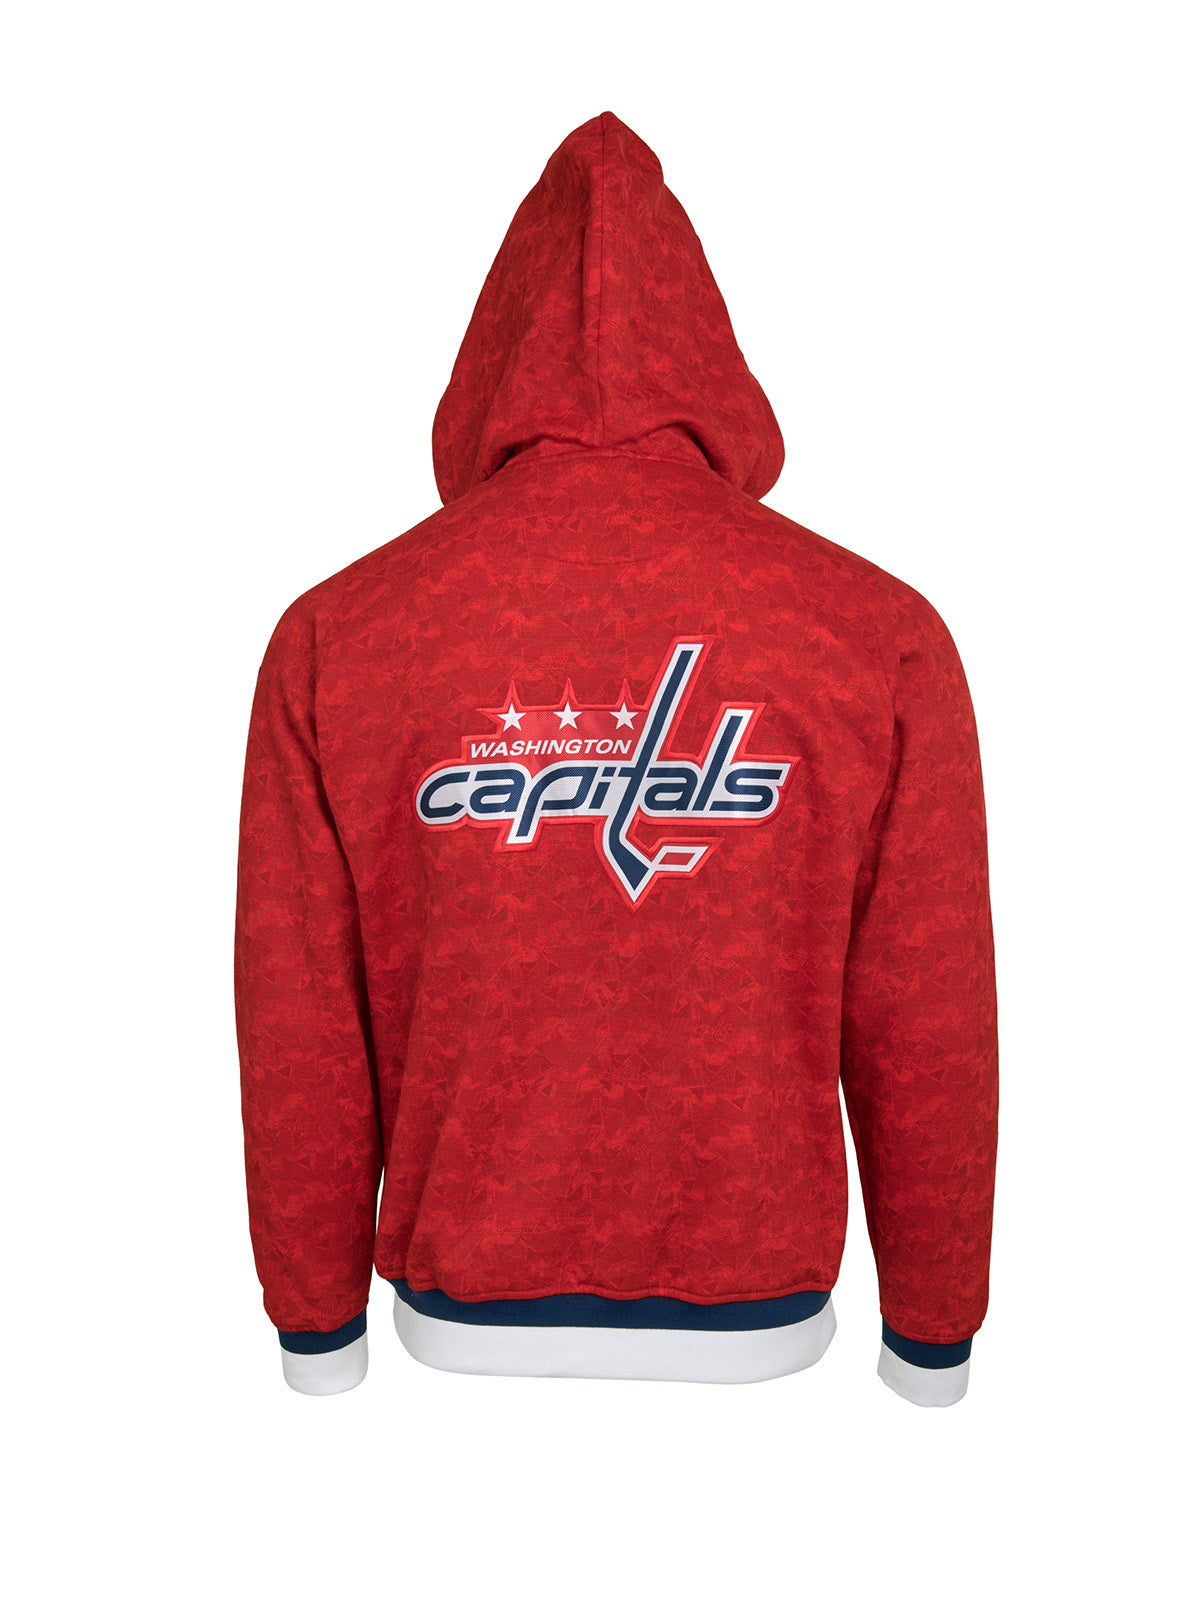 Washington Capitals Hoodie - Show your team spirit, with the iconic team logo patch centered on the back, and proudly display your Washington Capitals support in their team colors with this NHL hockey hoodie.